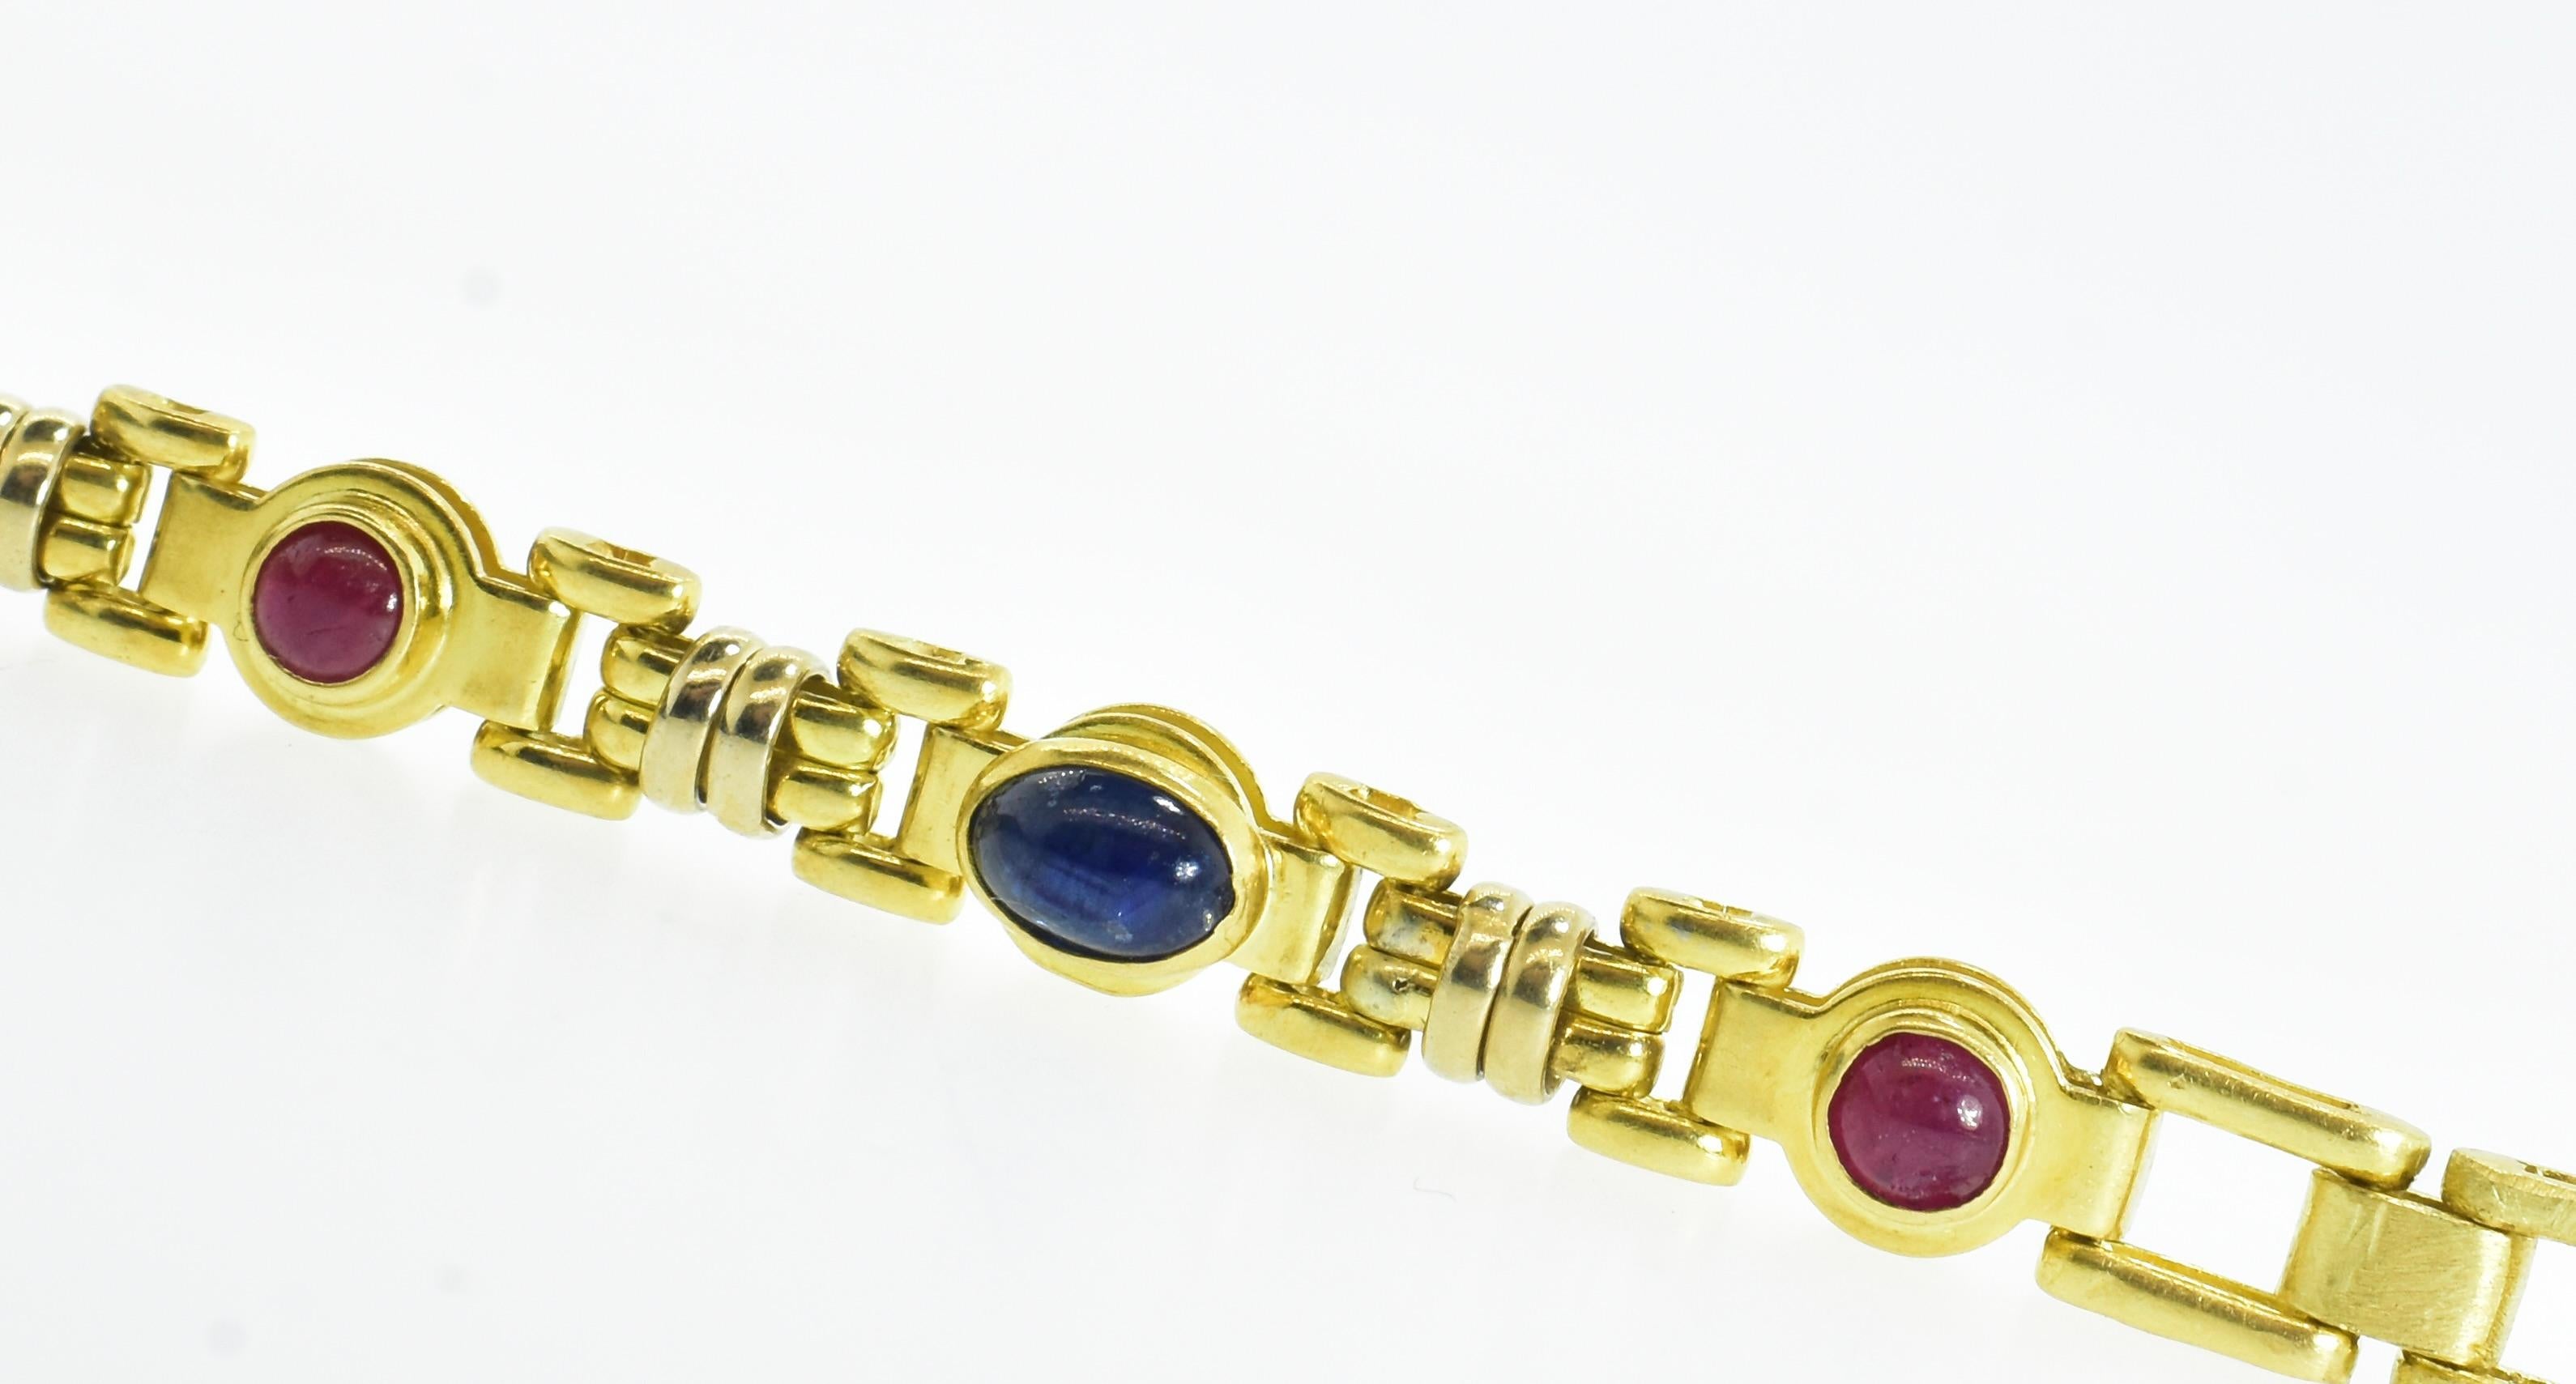 Women's or Men's 18K Bracelet with Sapphires and Rubies, Flexible and Unusual Complex Link. For Sale